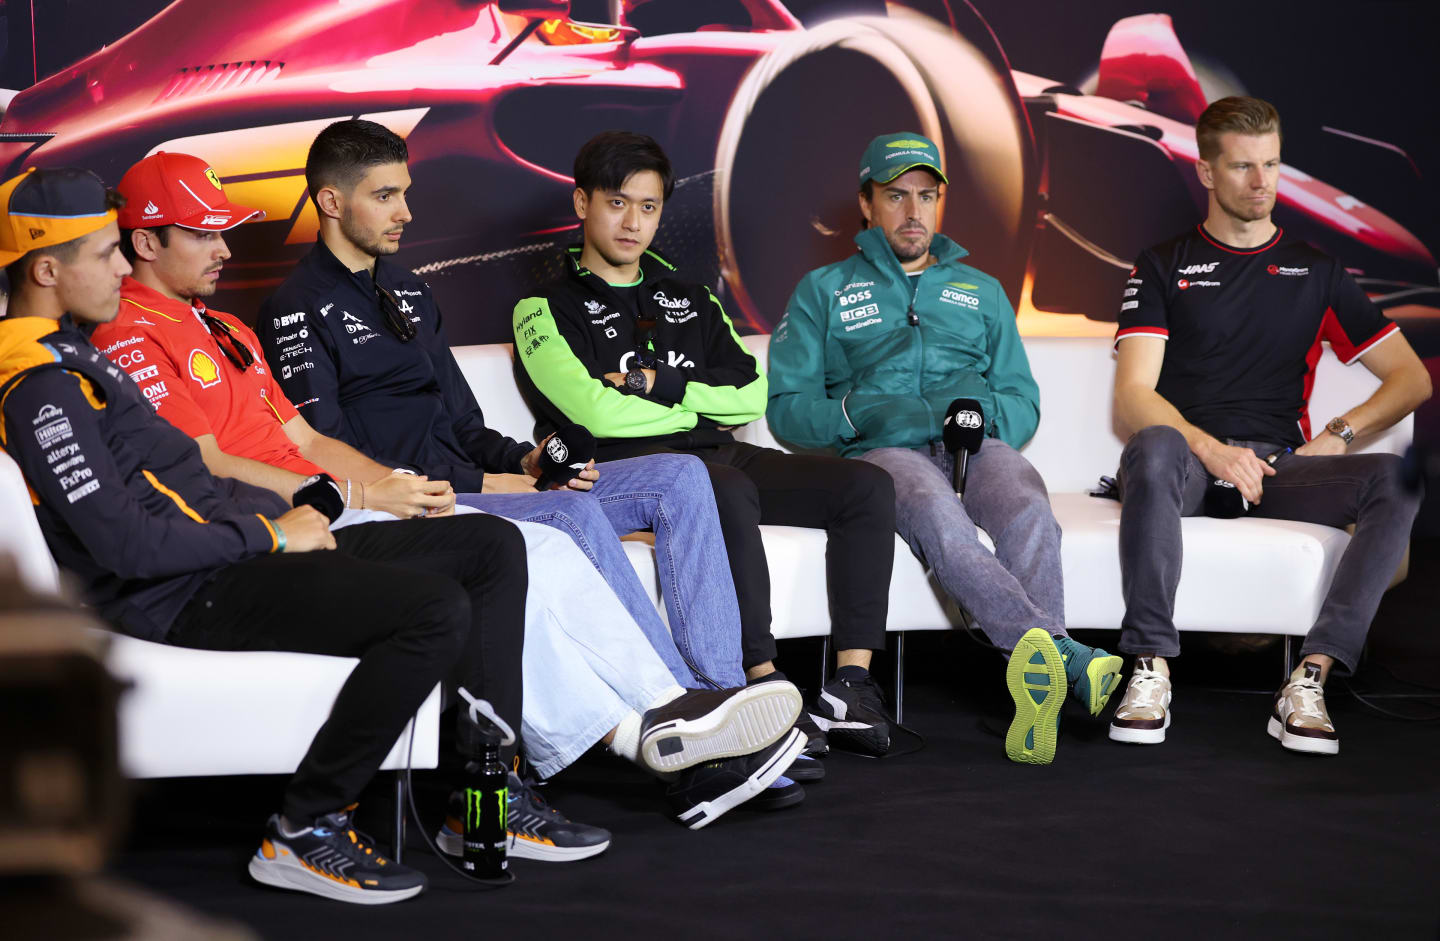 SHANGHAI, CHINA - APRIL 18: Lando Norris of Great Britain and McLaren, Charles Leclerc of Monaco and Ferrari, Esteban Ocon of France and Alpine F1, Zhou Guanyu of China and Stake F1 Team Kick Sauber, Fernando Alonso of Spain and Aston Martin F1 Team and Nico Hulkenberg of Germany and Haas F1 attend the Drivers Press Conference during previews ahead of the F1 Grand Prix of China at Shanghai International Circuit on April 18, 2024 in Shanghai, China. (Photo by Lintao Zhang/Getty Images )